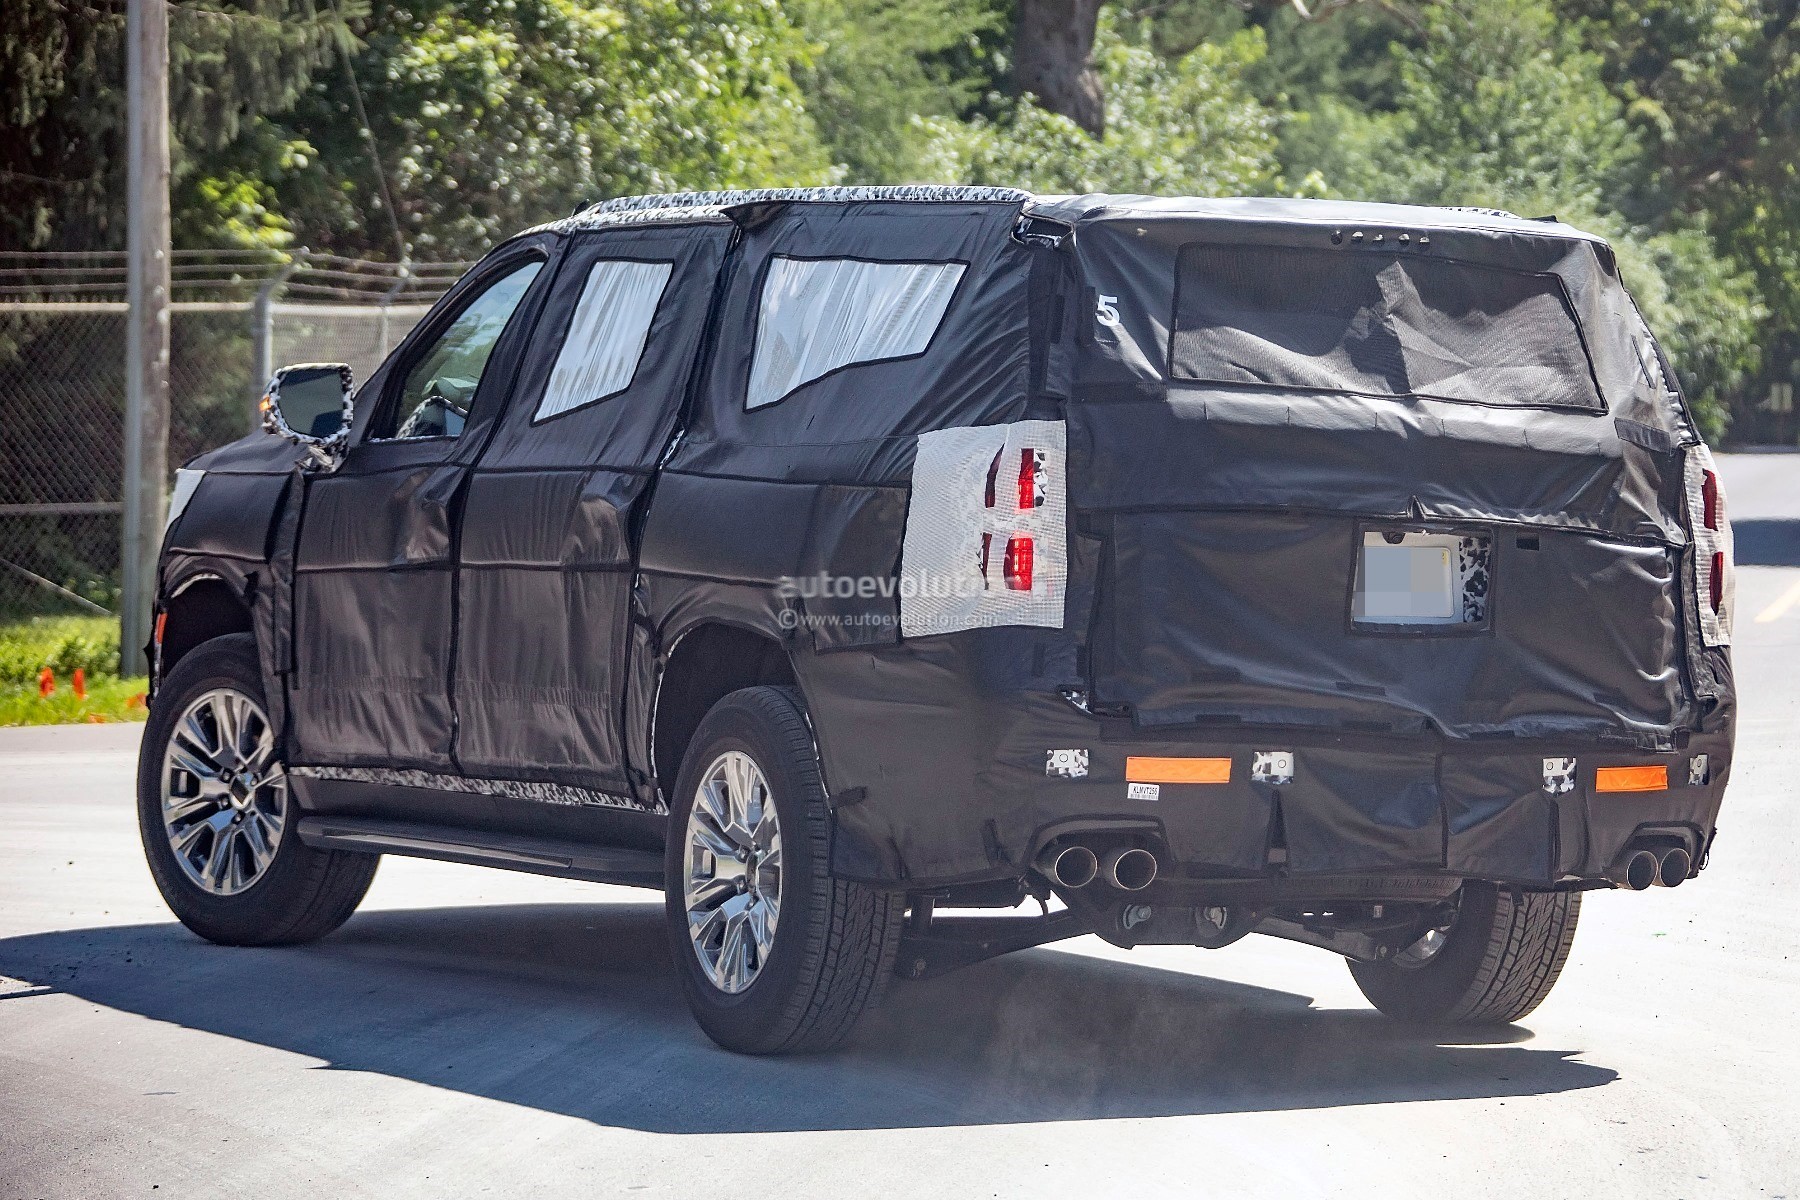 2021 Gmc Yukon Spied In Xl Denali Configuration Out In The